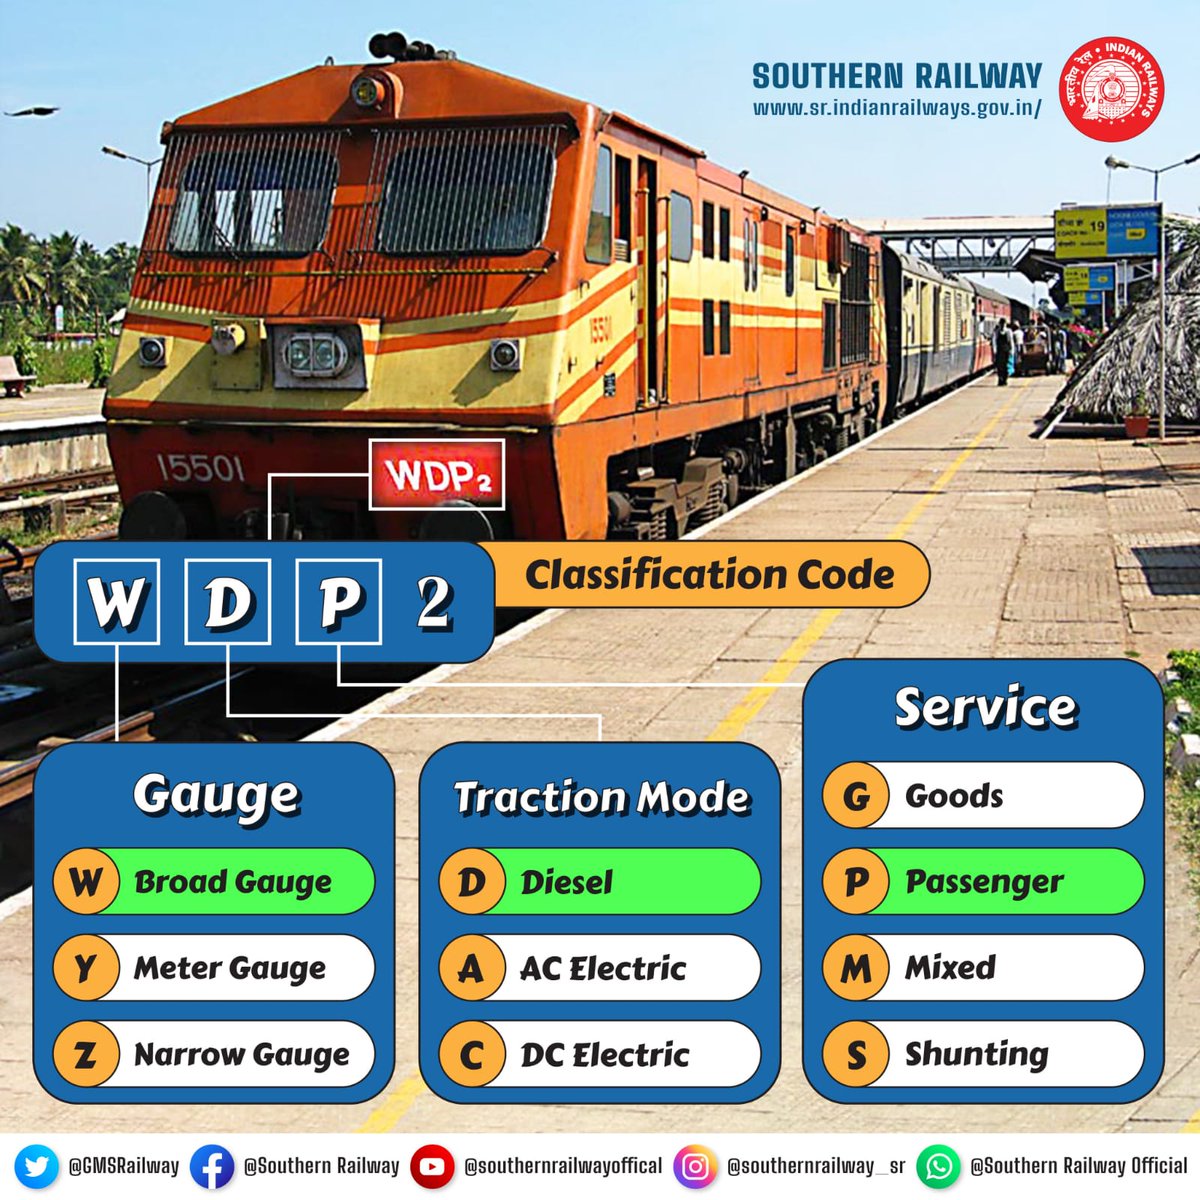 Curious about the force behind those lengthy trains? Get acquainted with the WDP2, a vital asset in #IndianRailways.

Uncover the tales behind these engineering wonders and delve into their intriguing history, technology, and significance.

#KnowYourLocomotives #SouthernRailway